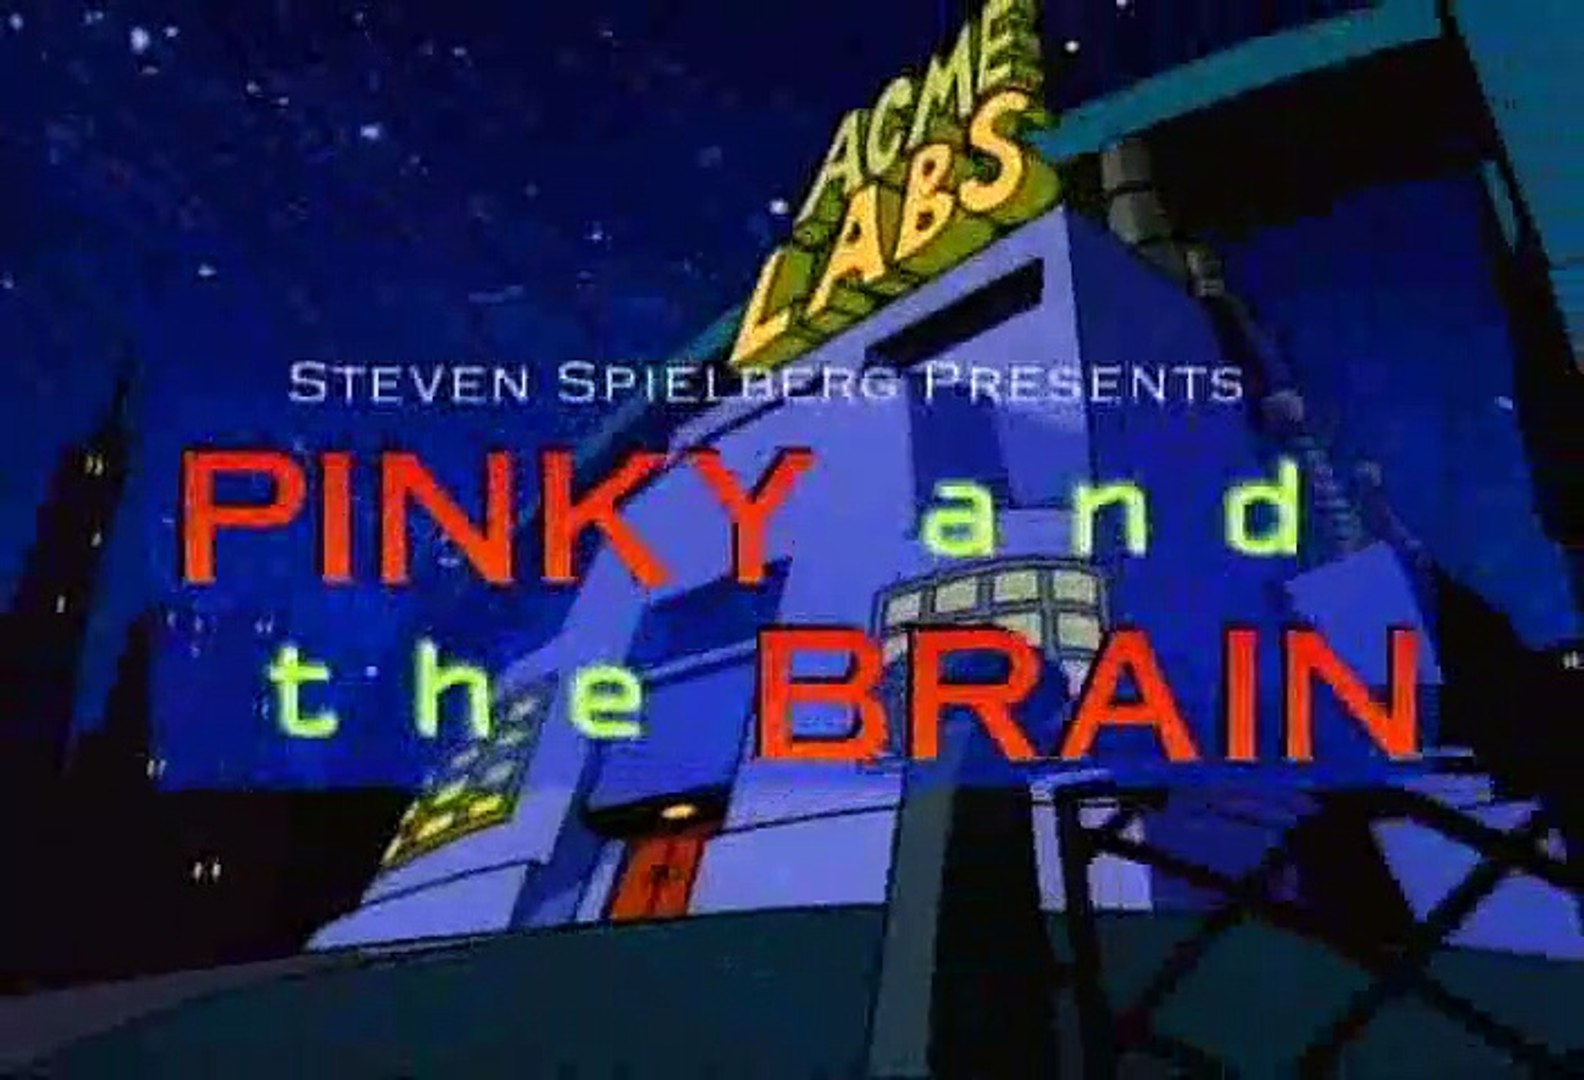 Pinky and the Brain: Where to Watch and Stream Online